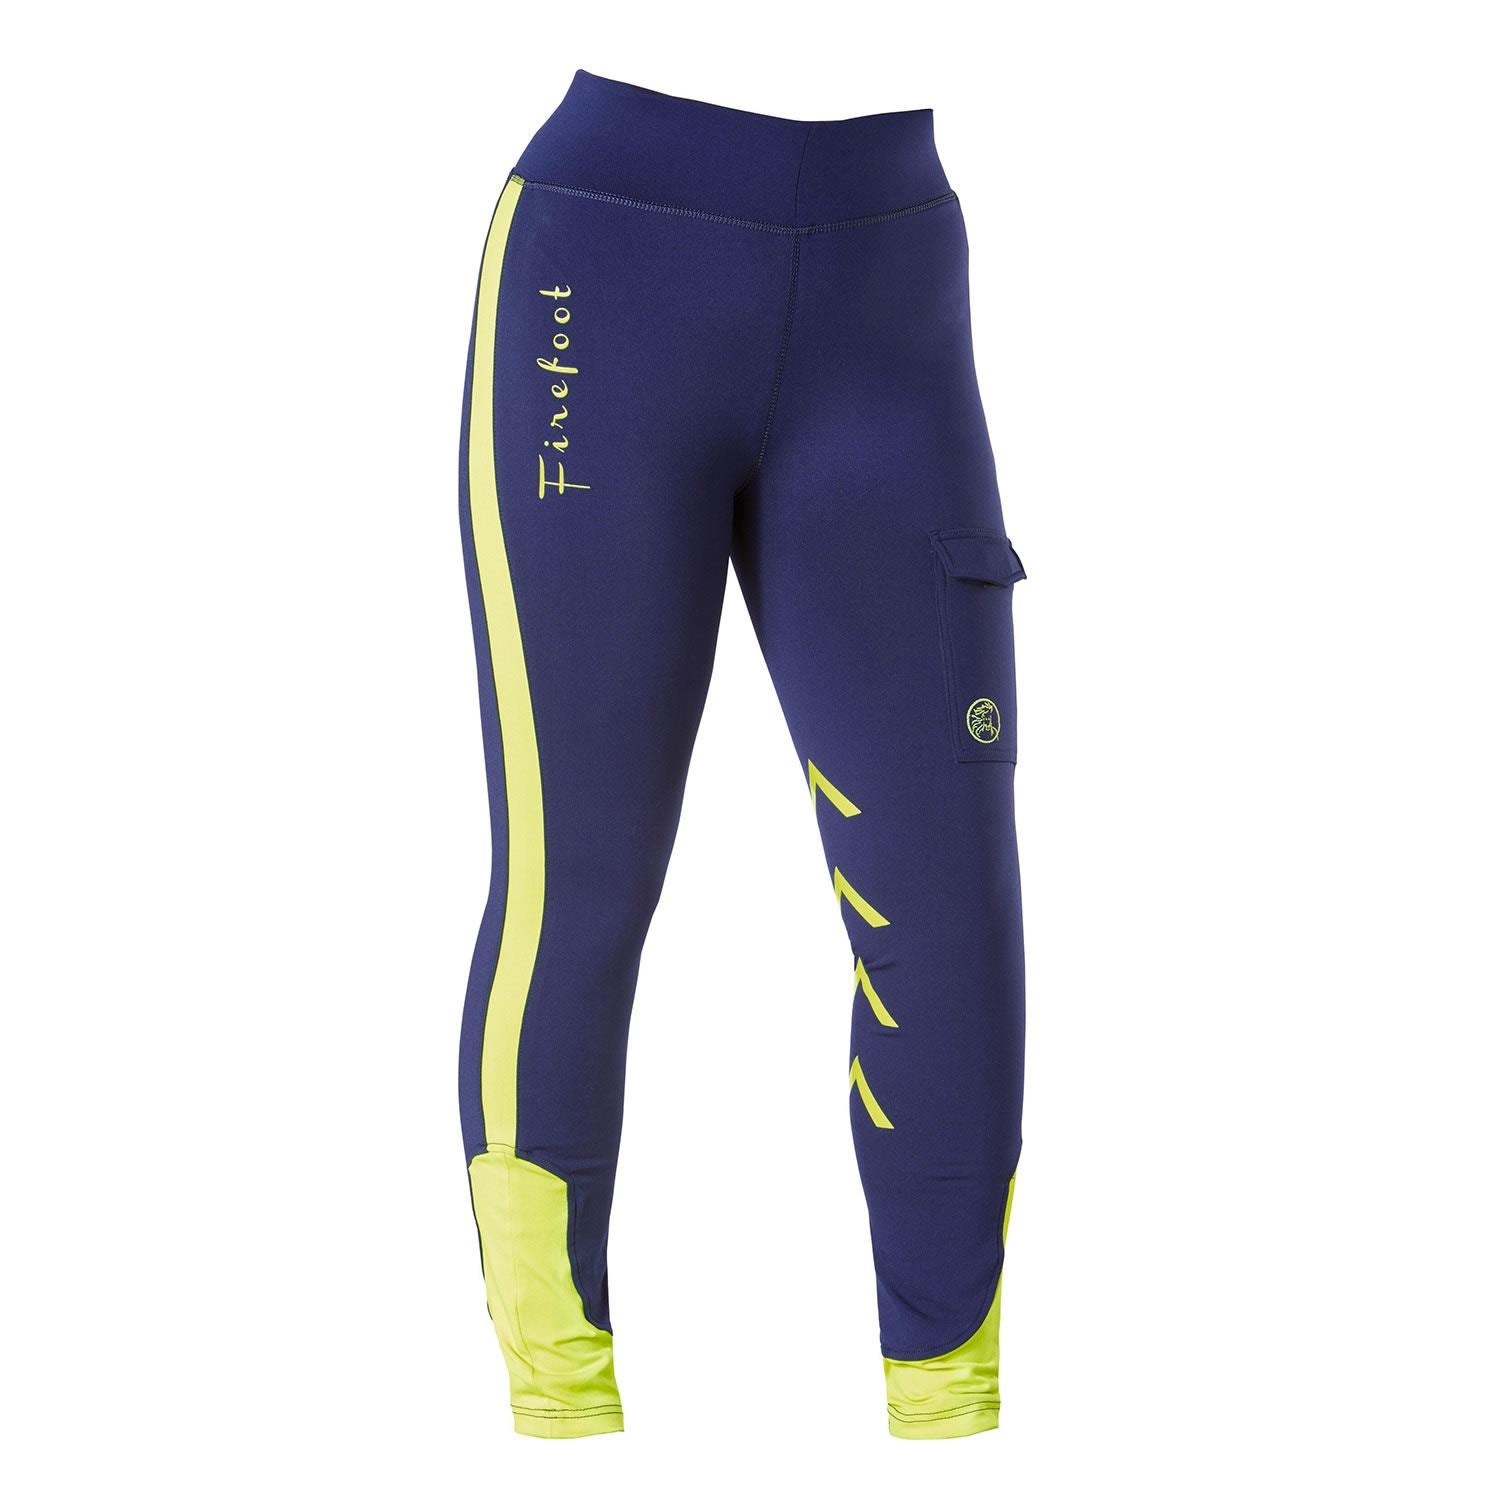 Firefoot Ripon Reflective Breeches Kids - Just Horse Riders